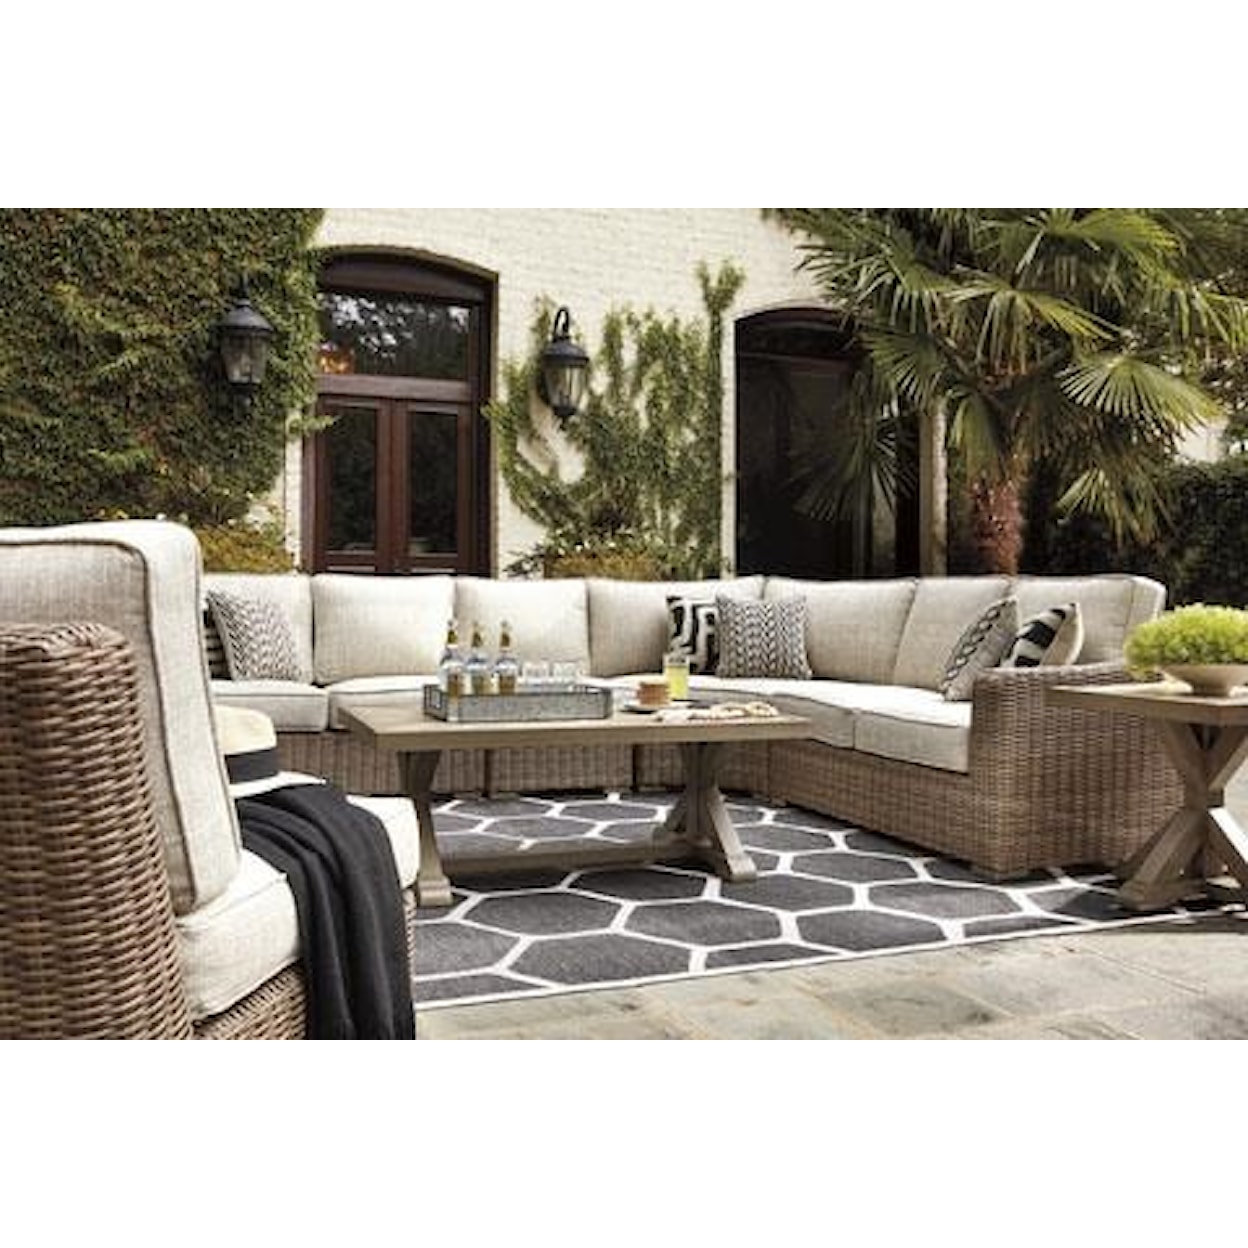 Signature Design by Ashley Beachcroft 3 Piece Outdoor Sectional